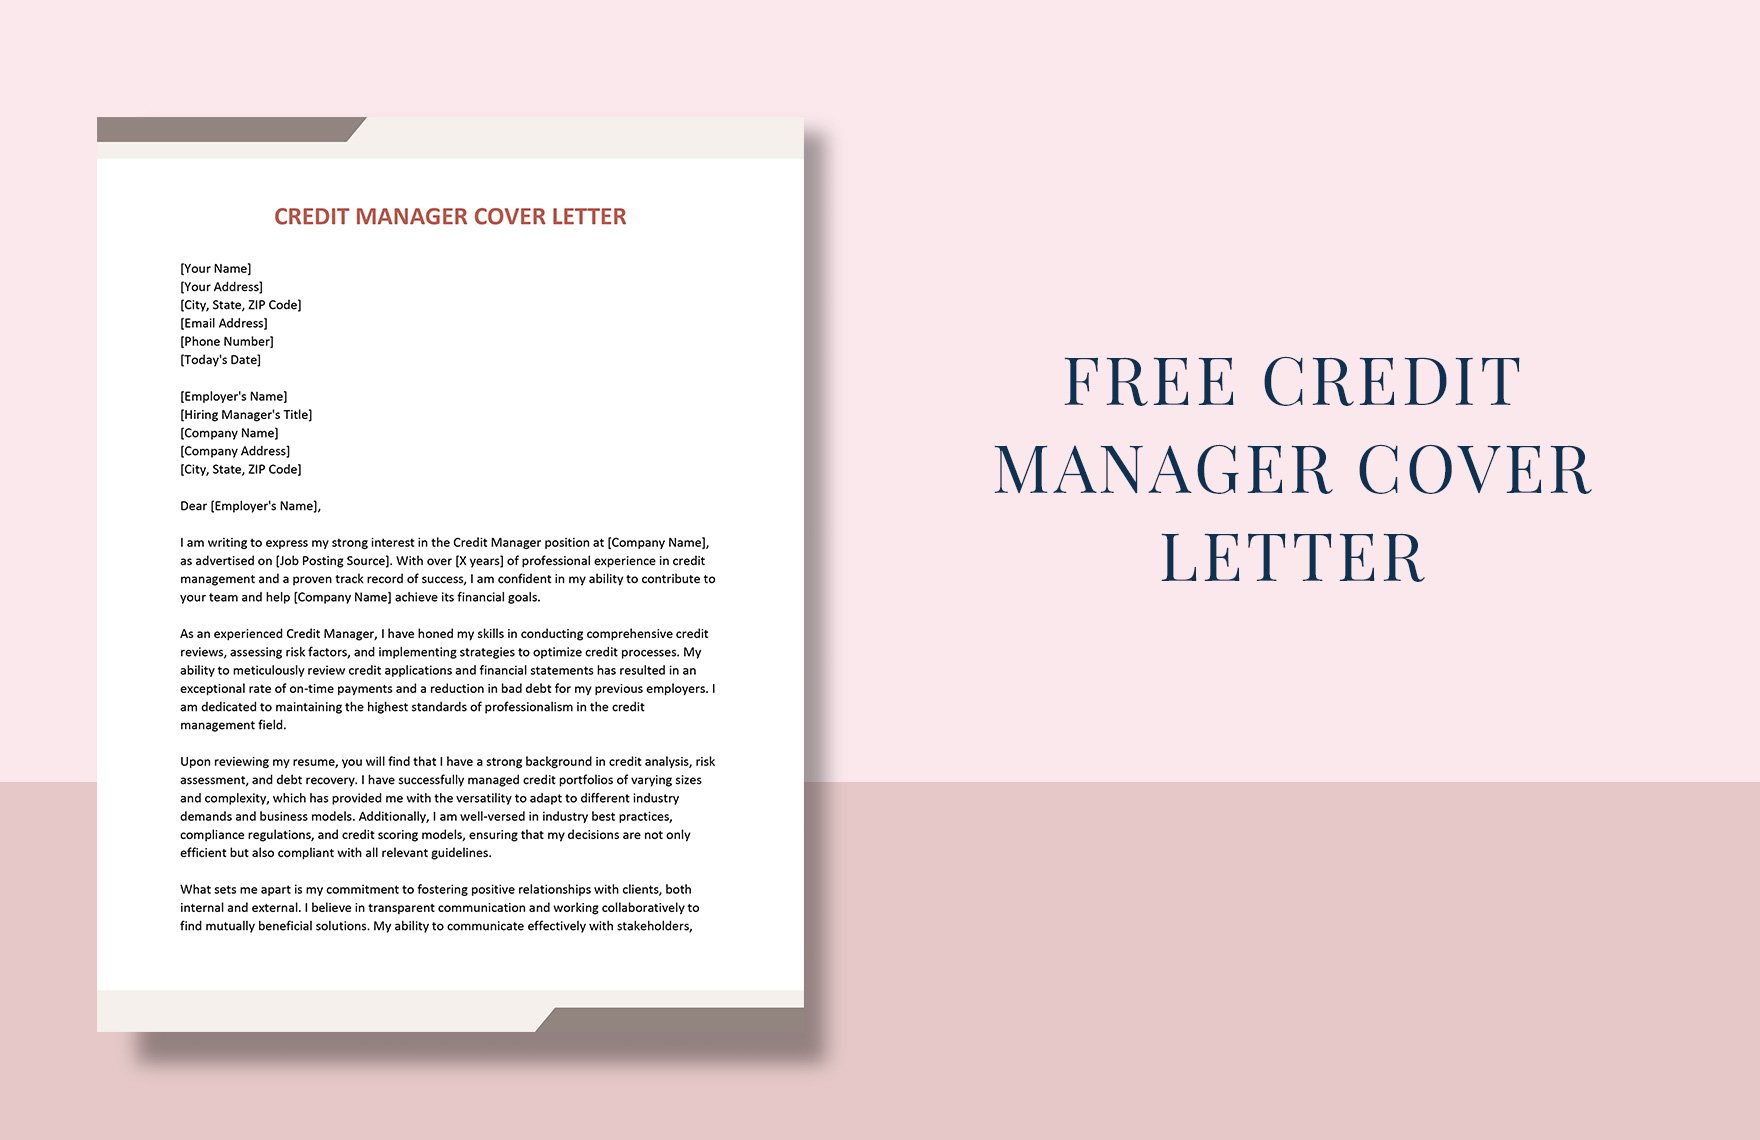 Credit Manager Cover Letter